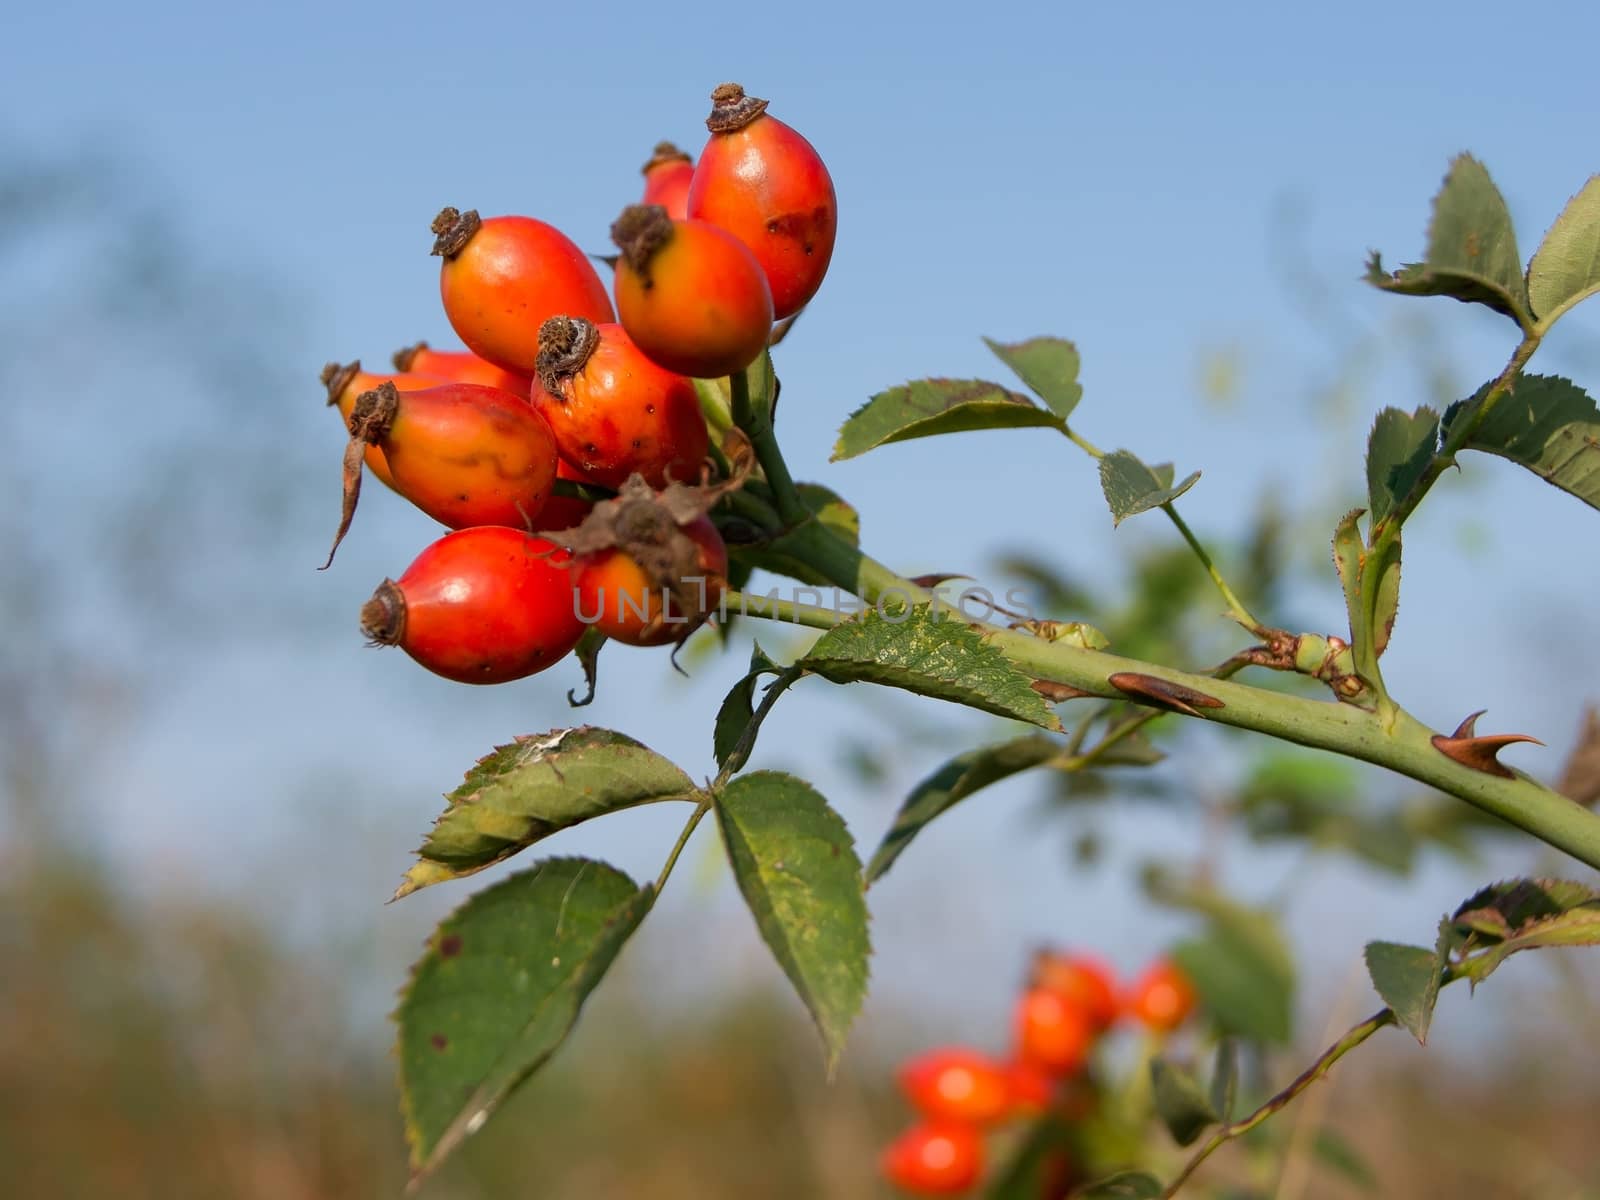 The wild rose (Rosa Canina) berries, rose hips.